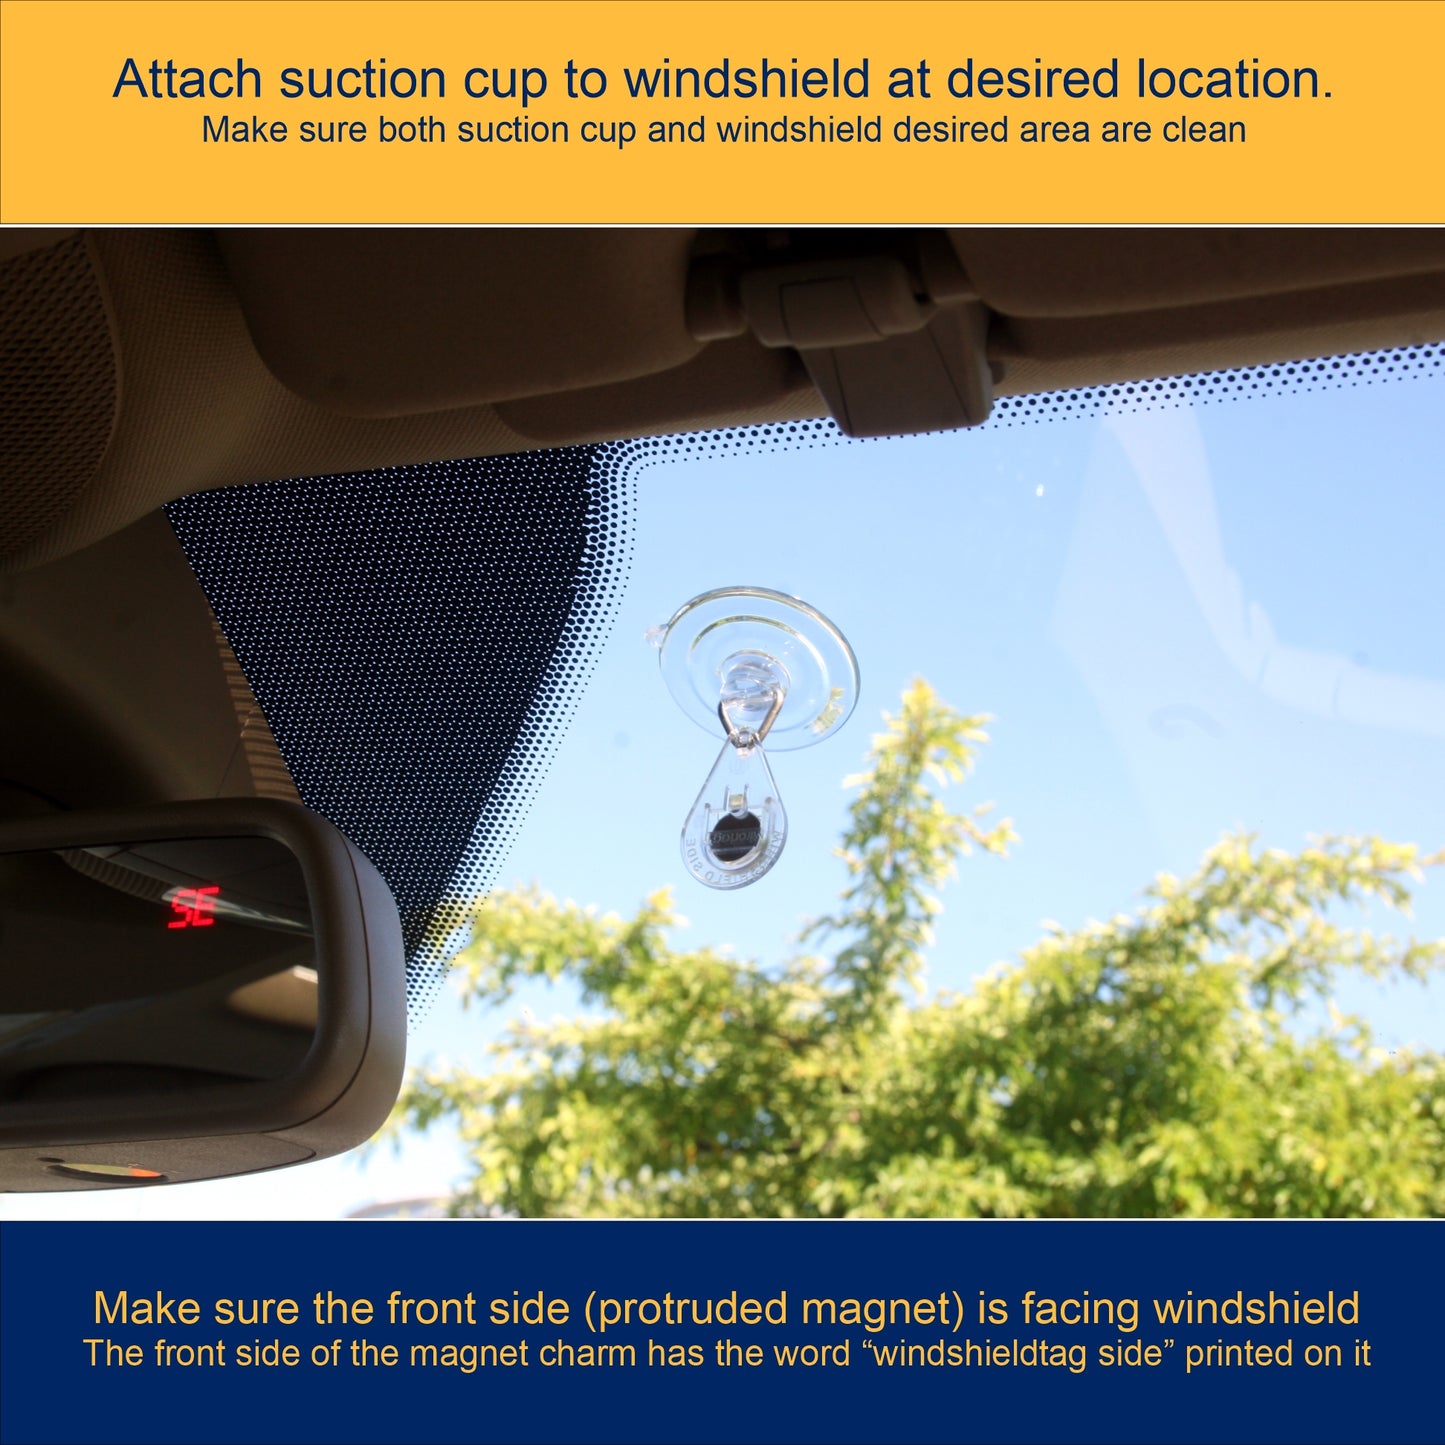 Industrial grade suction cup and magnet charm for mirortag holders for handicap placard tags